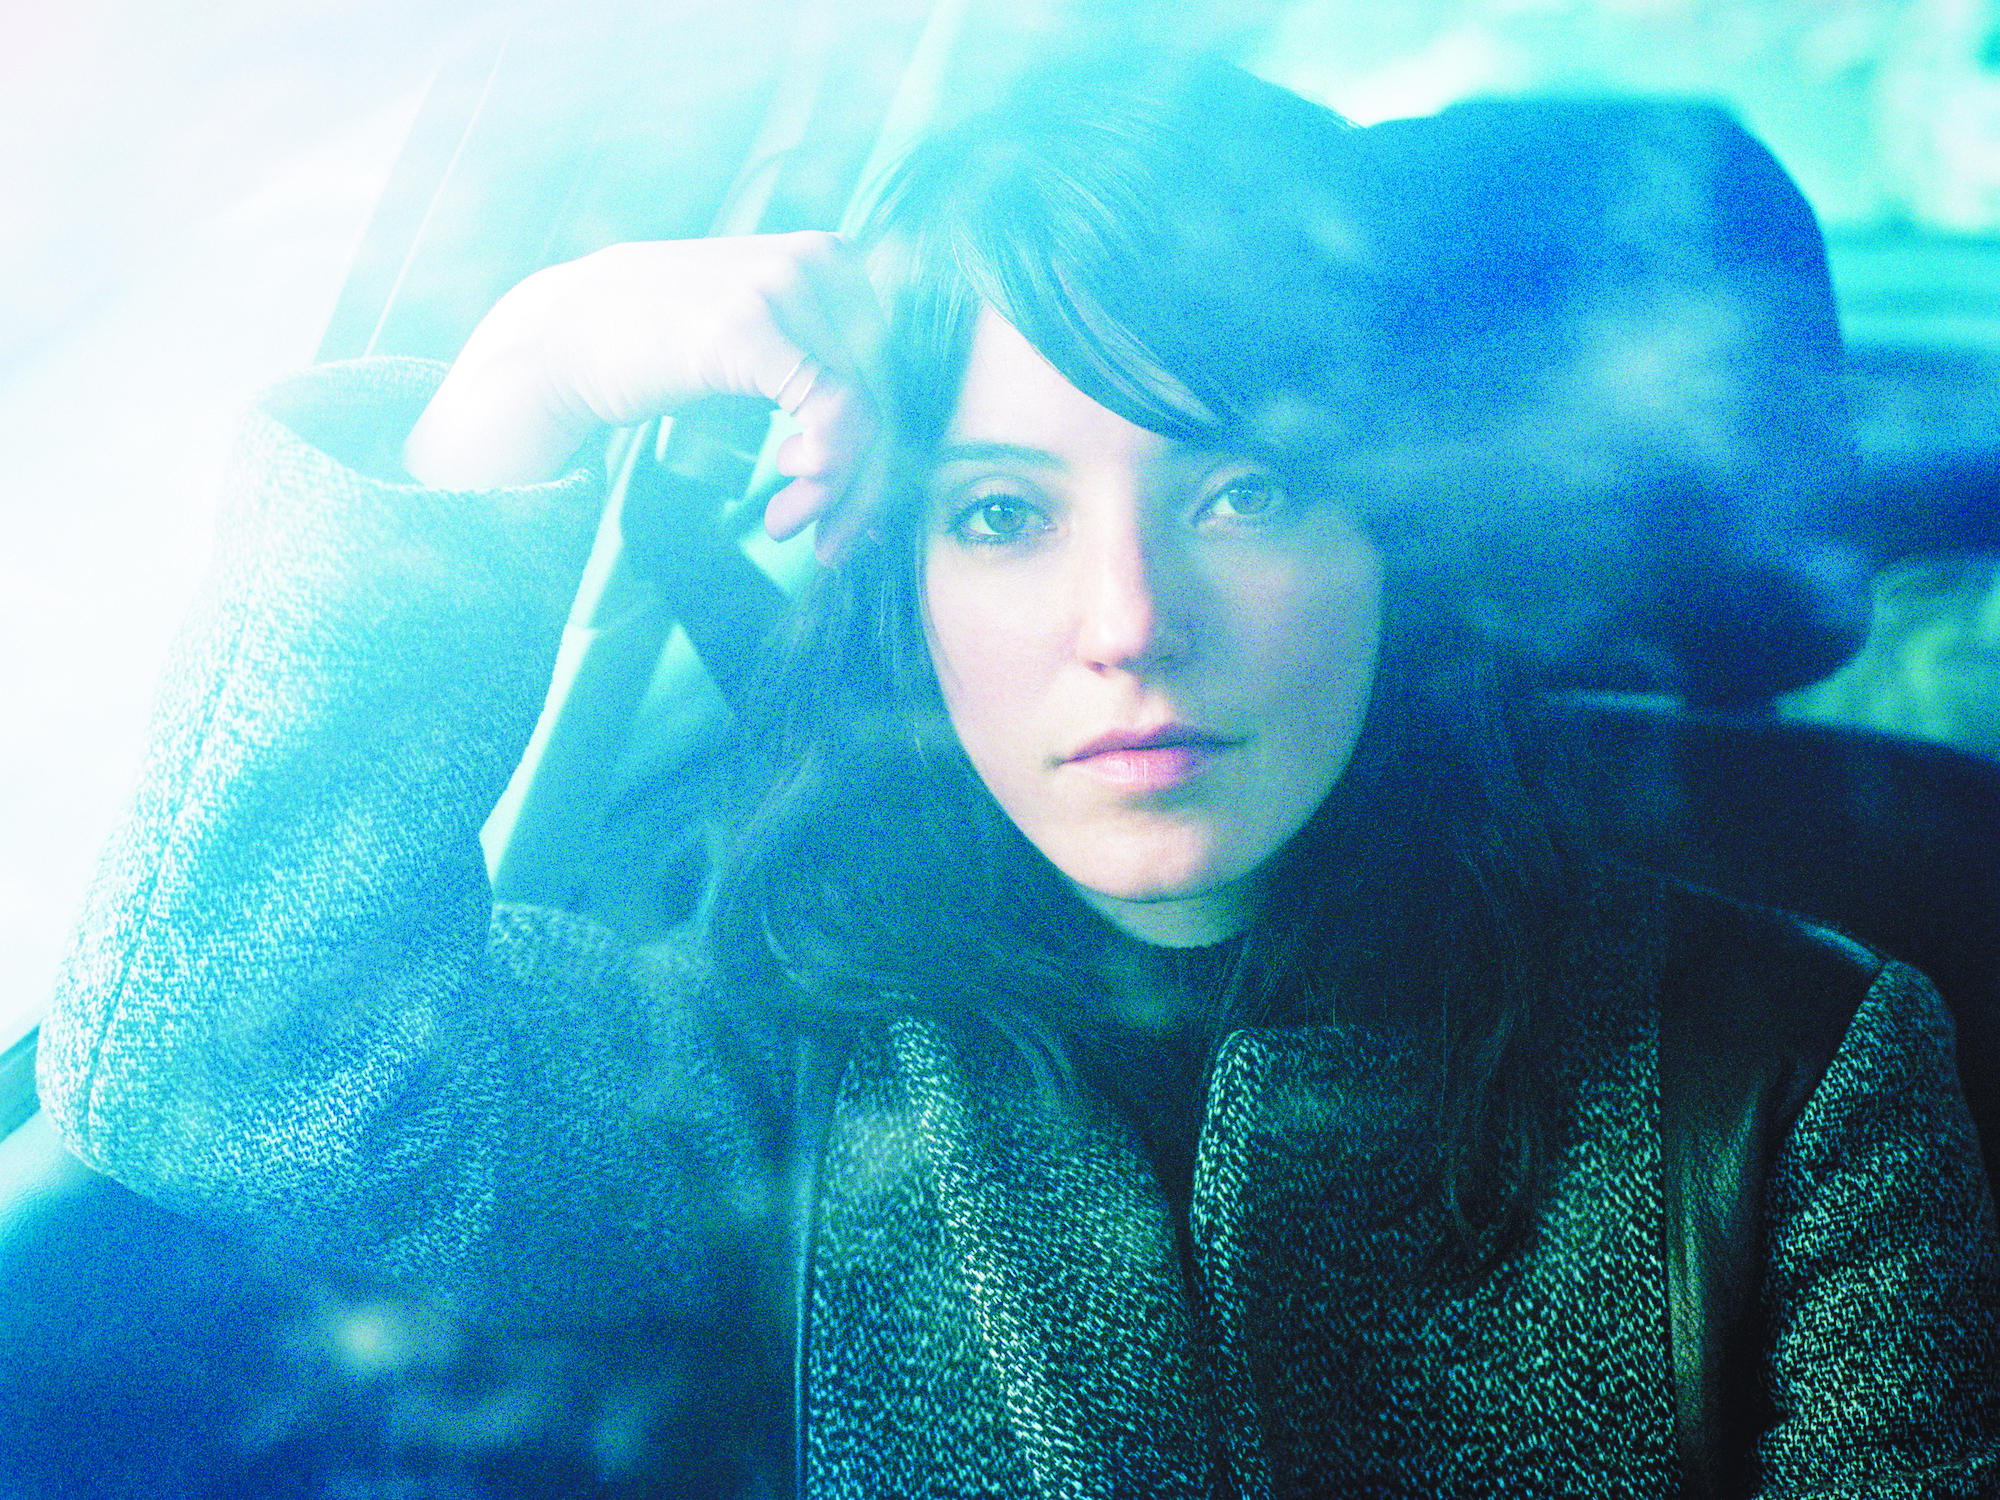 For all the heartache found in her songs, Sharon Van Etten comes